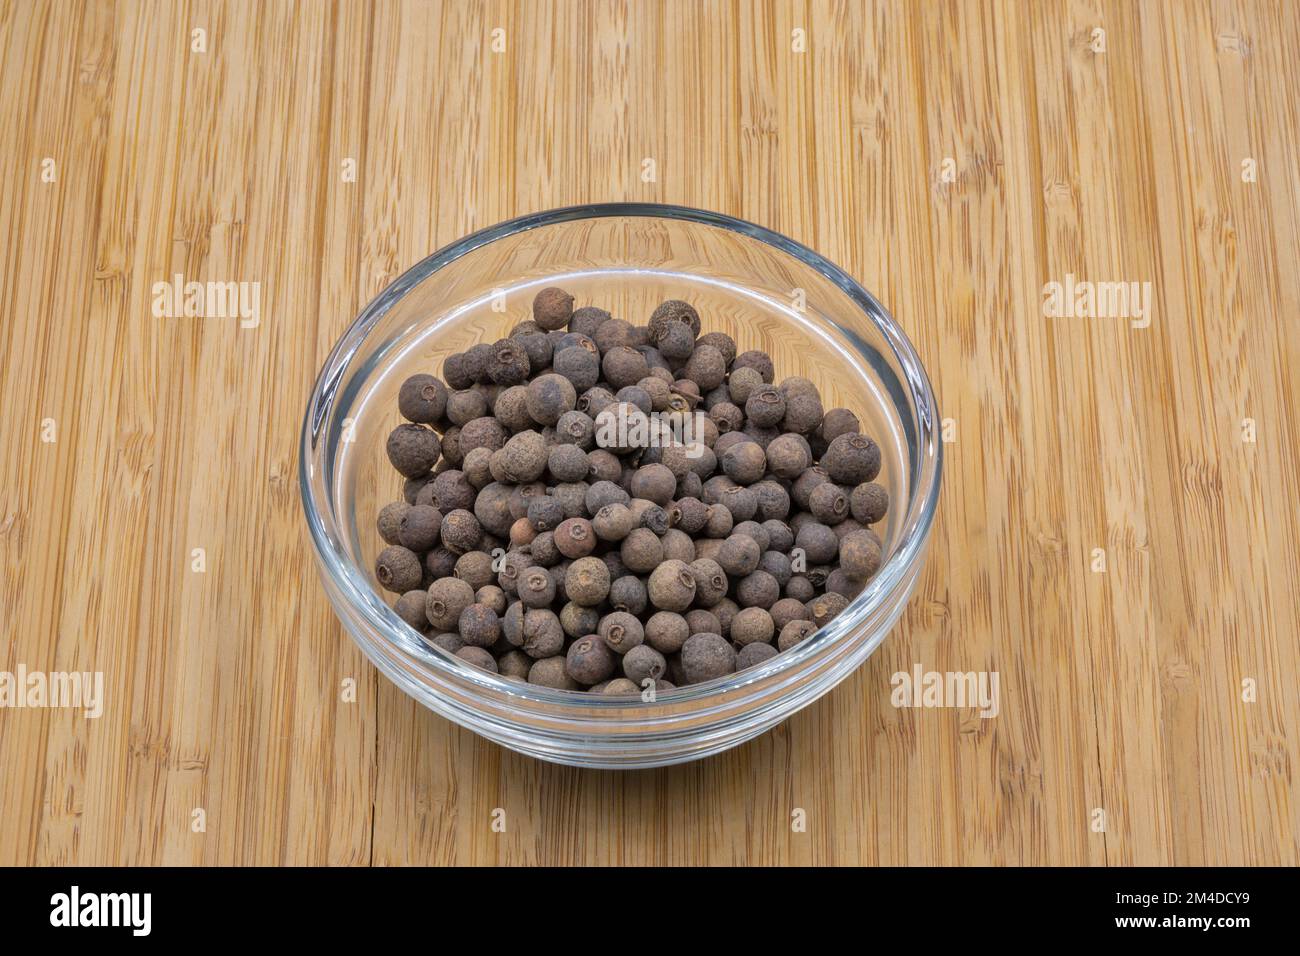 Allspice pepper in a glass bowl closeup on wooden background Stock Photo